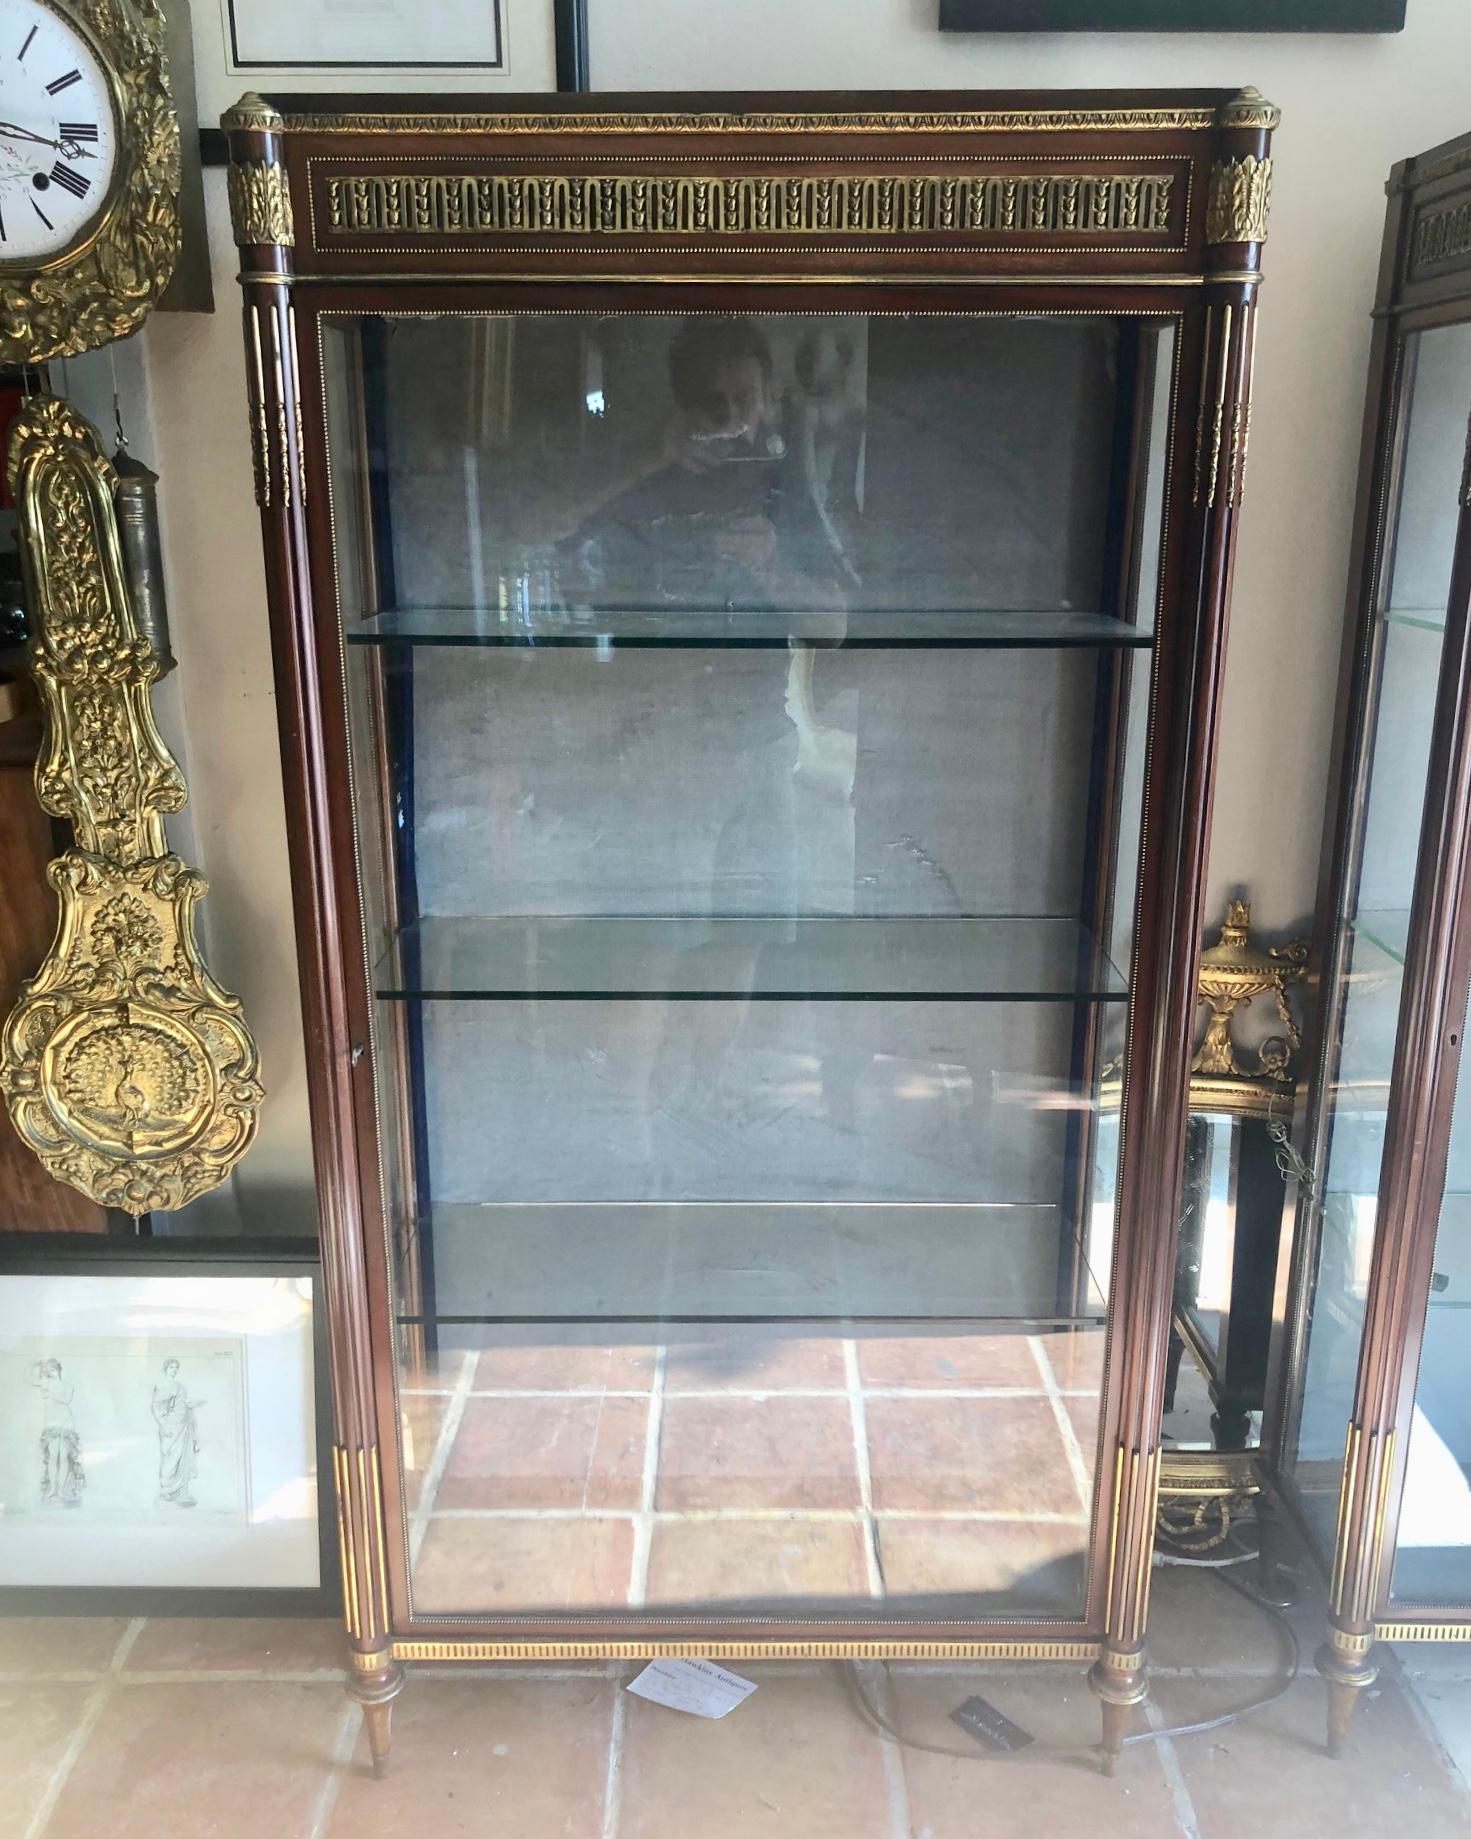 These are a superb pair of French display cabinets of the highest quality.
Lovely ormolu all-over the cabinets.
They sit on small turned legs and have 3 glass shelves inside.
It’s a very deep rich mahogany far nicer than the picture shows.
They